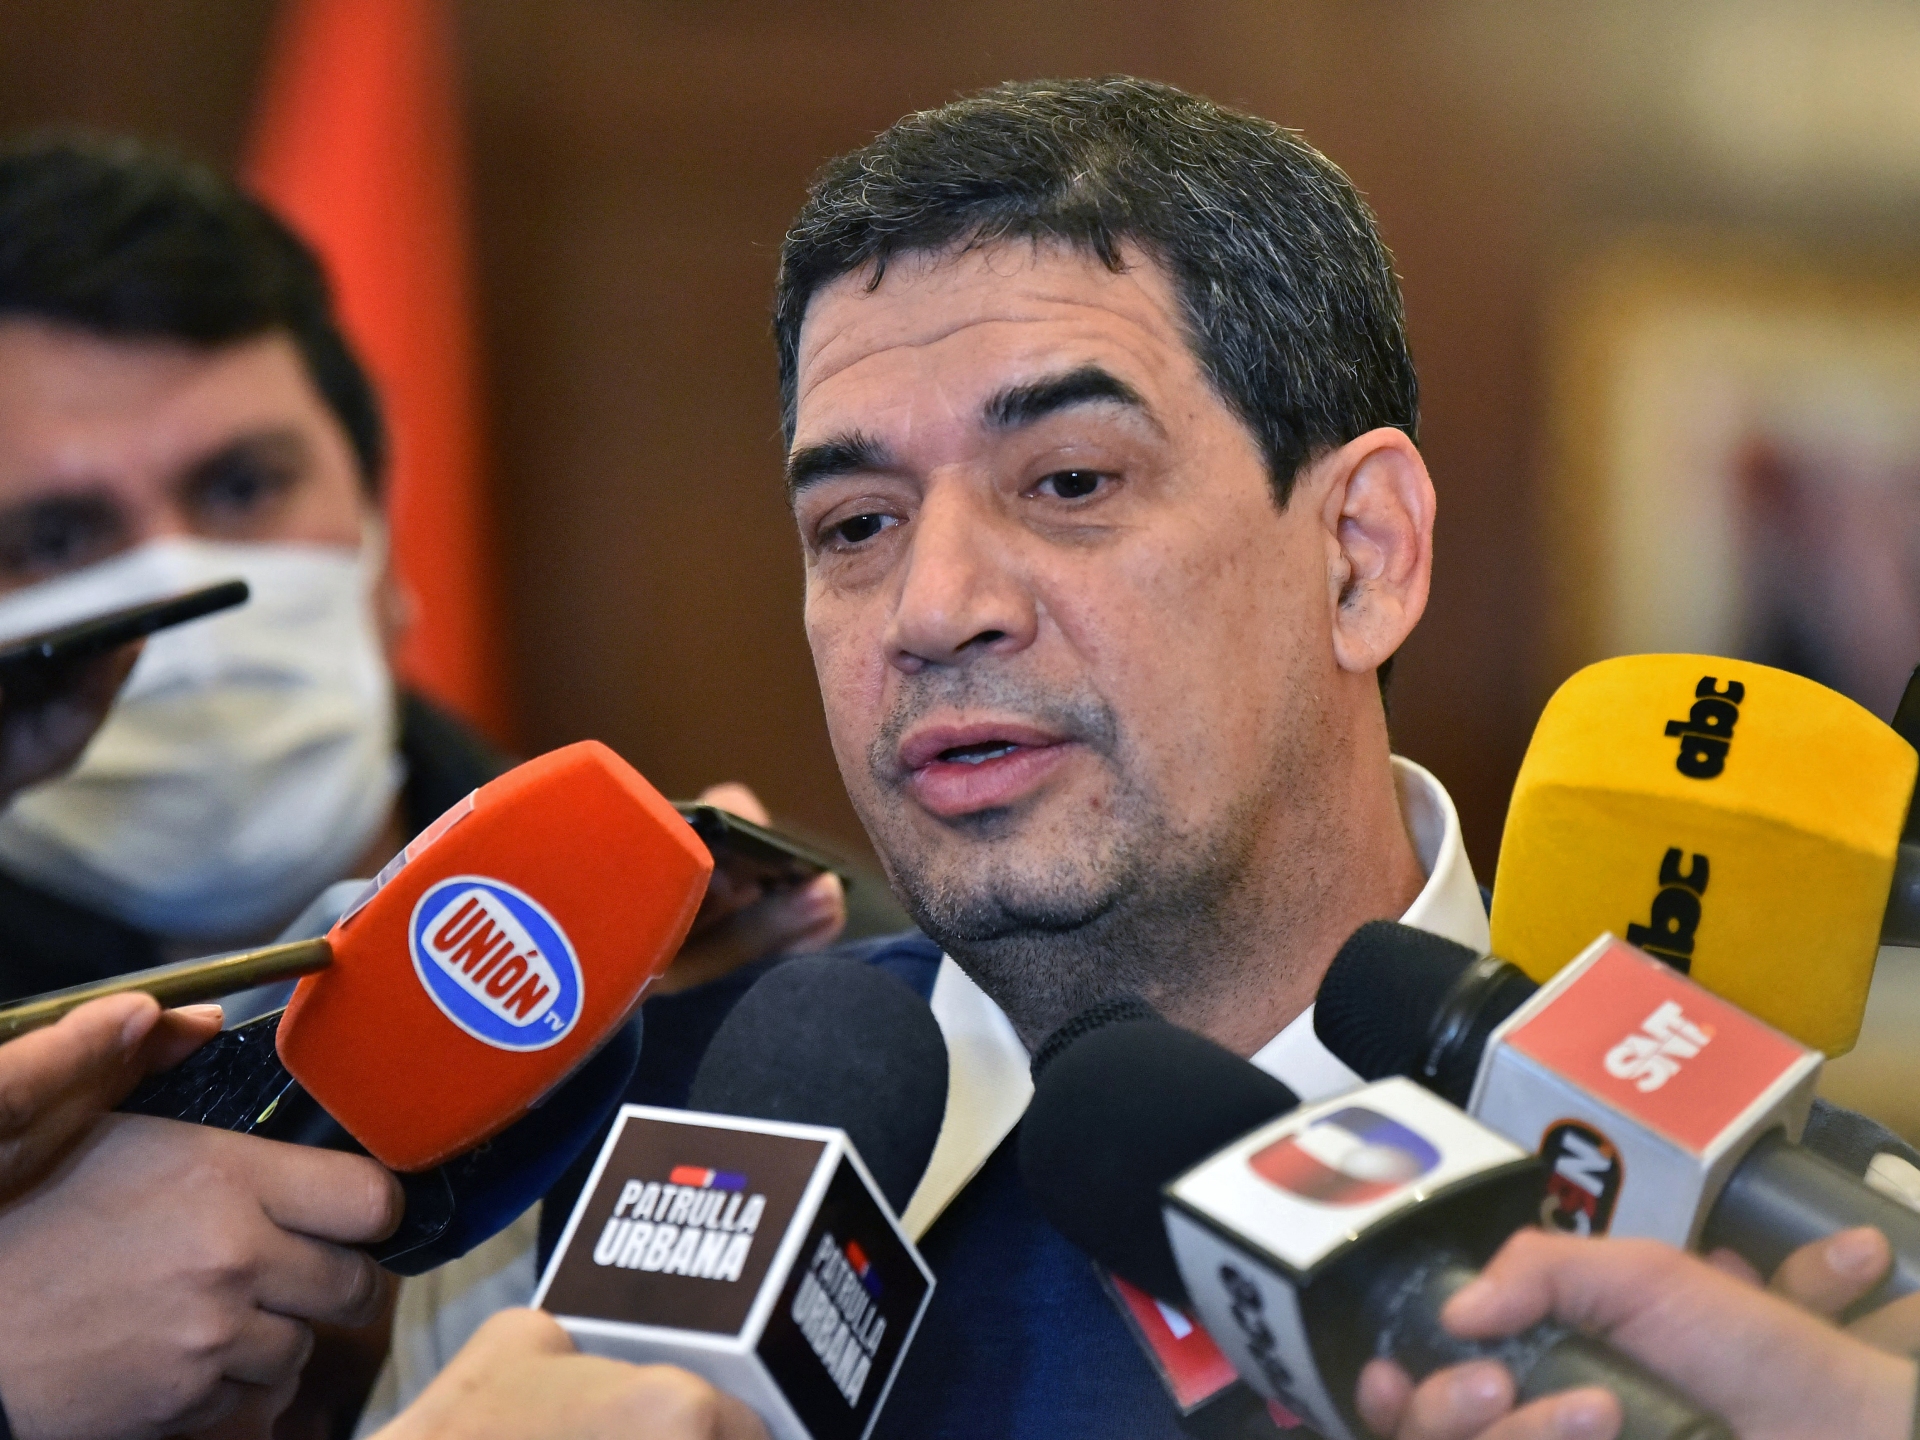 Paraguay’s vice president to stay on after corruption accusations